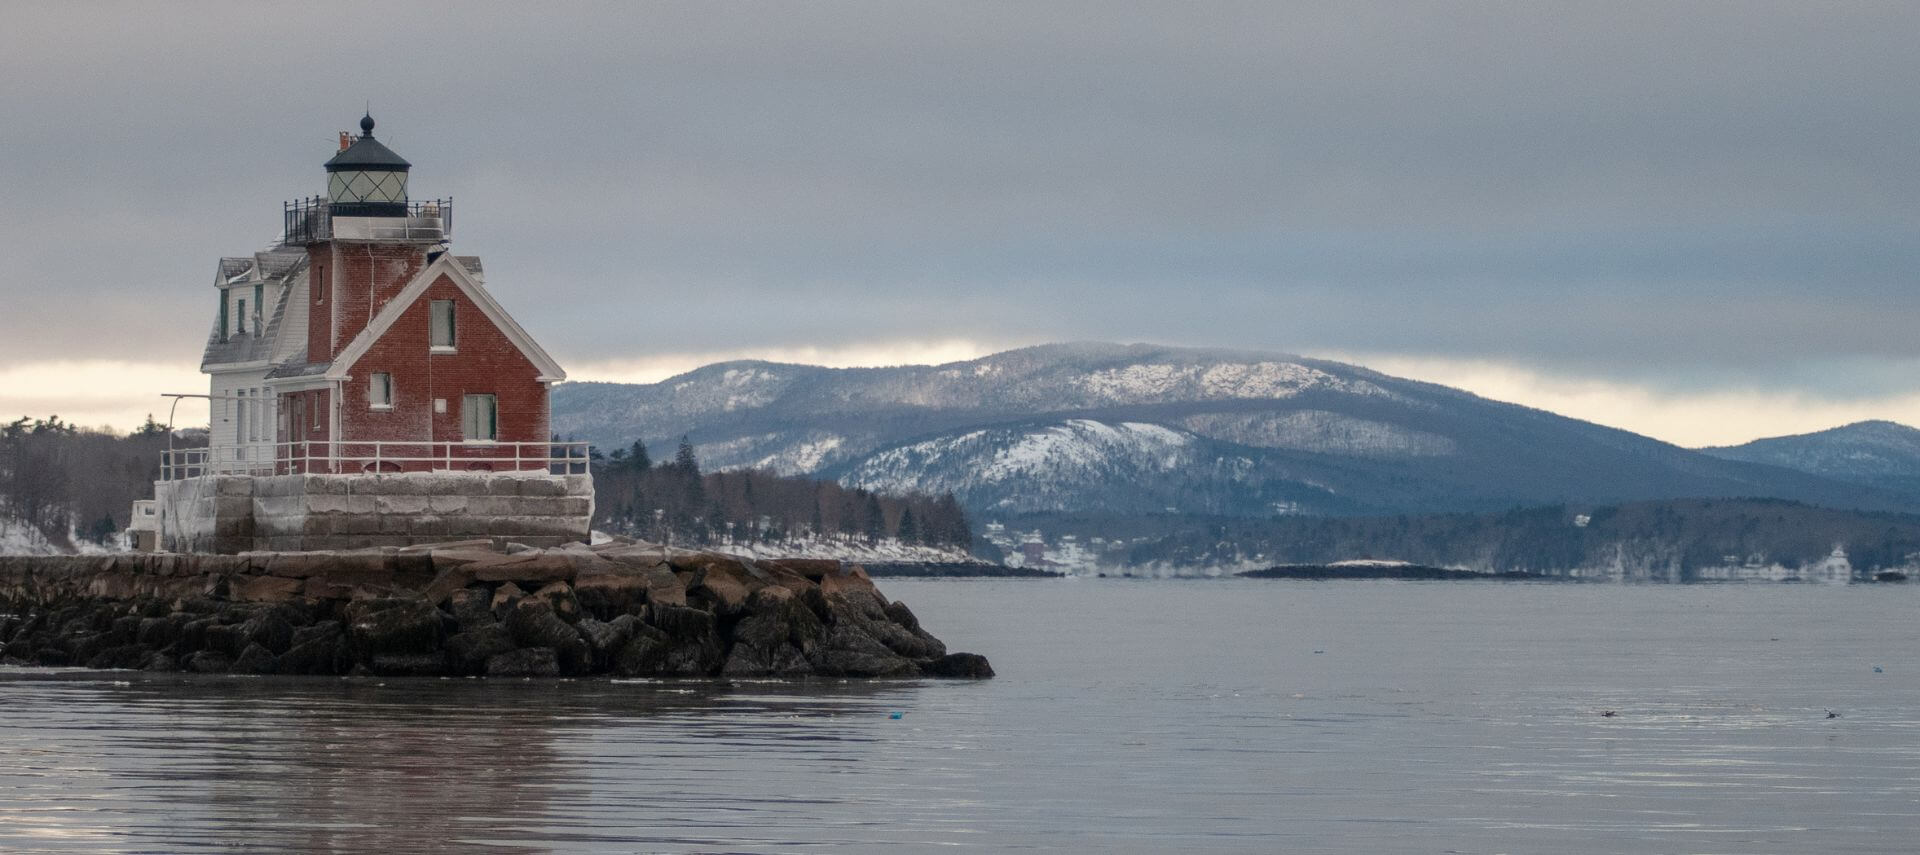 Rockland’s Breakwater Lighthouse on a grey wintry day